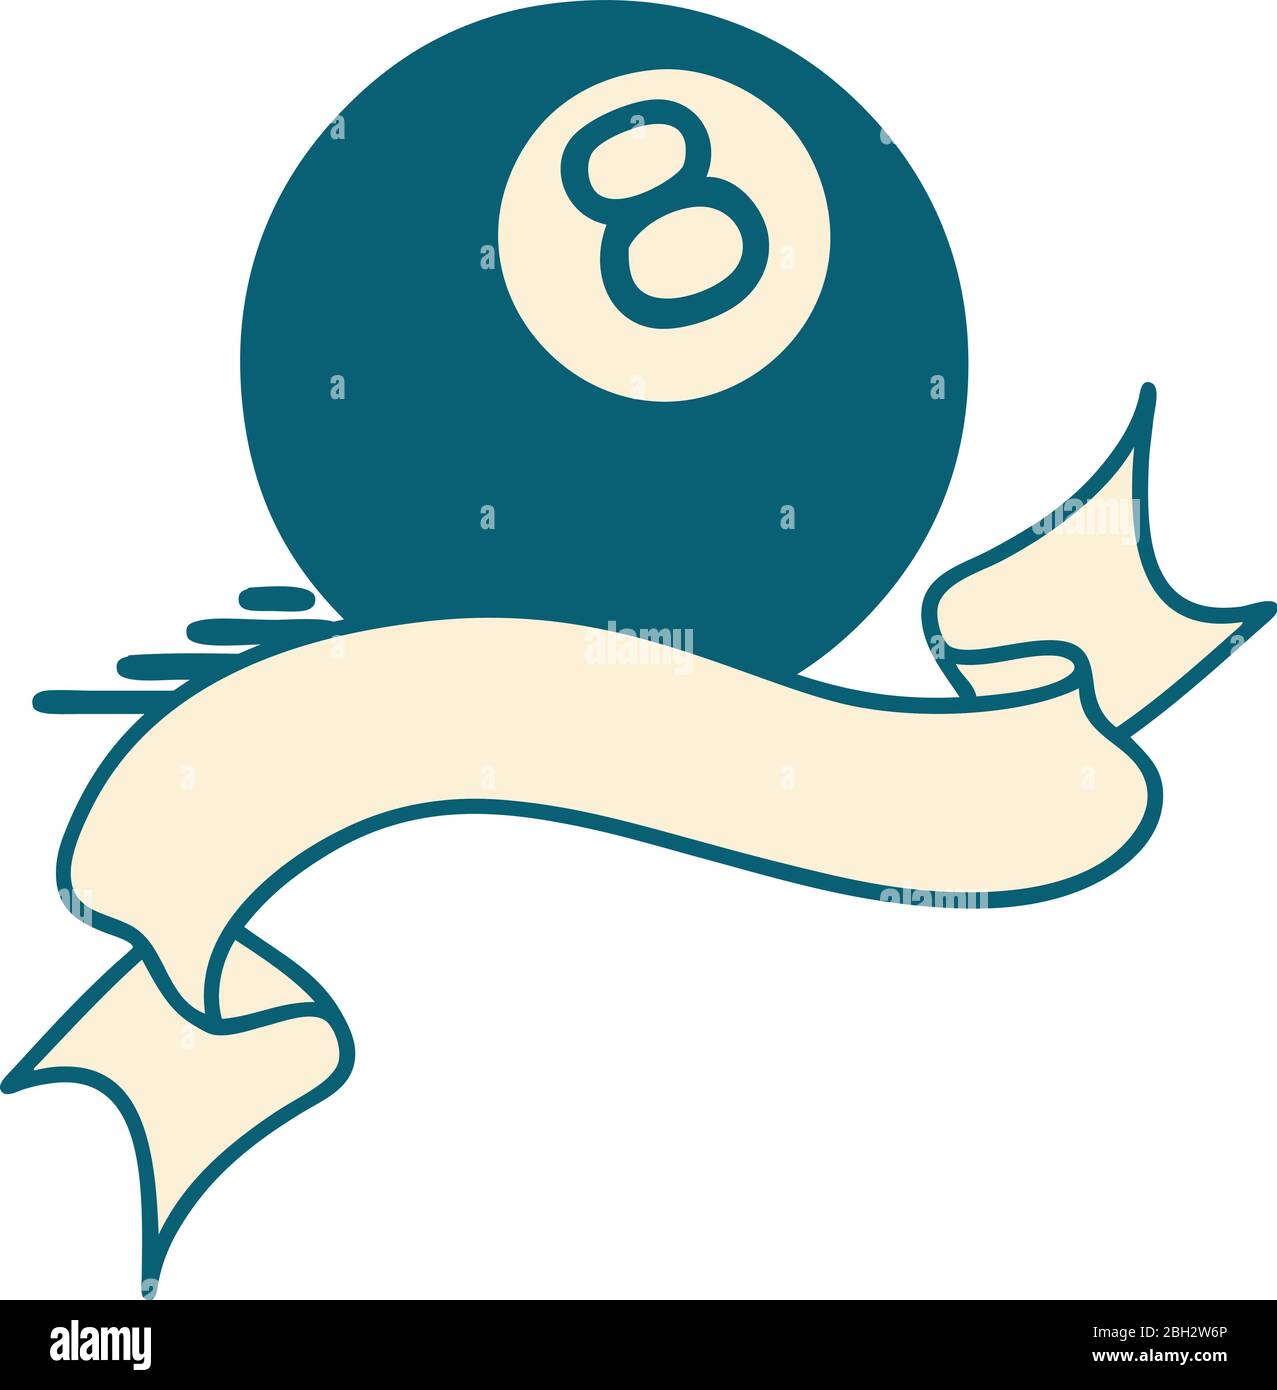 Eight Ball Tattoo Vector Images (82)